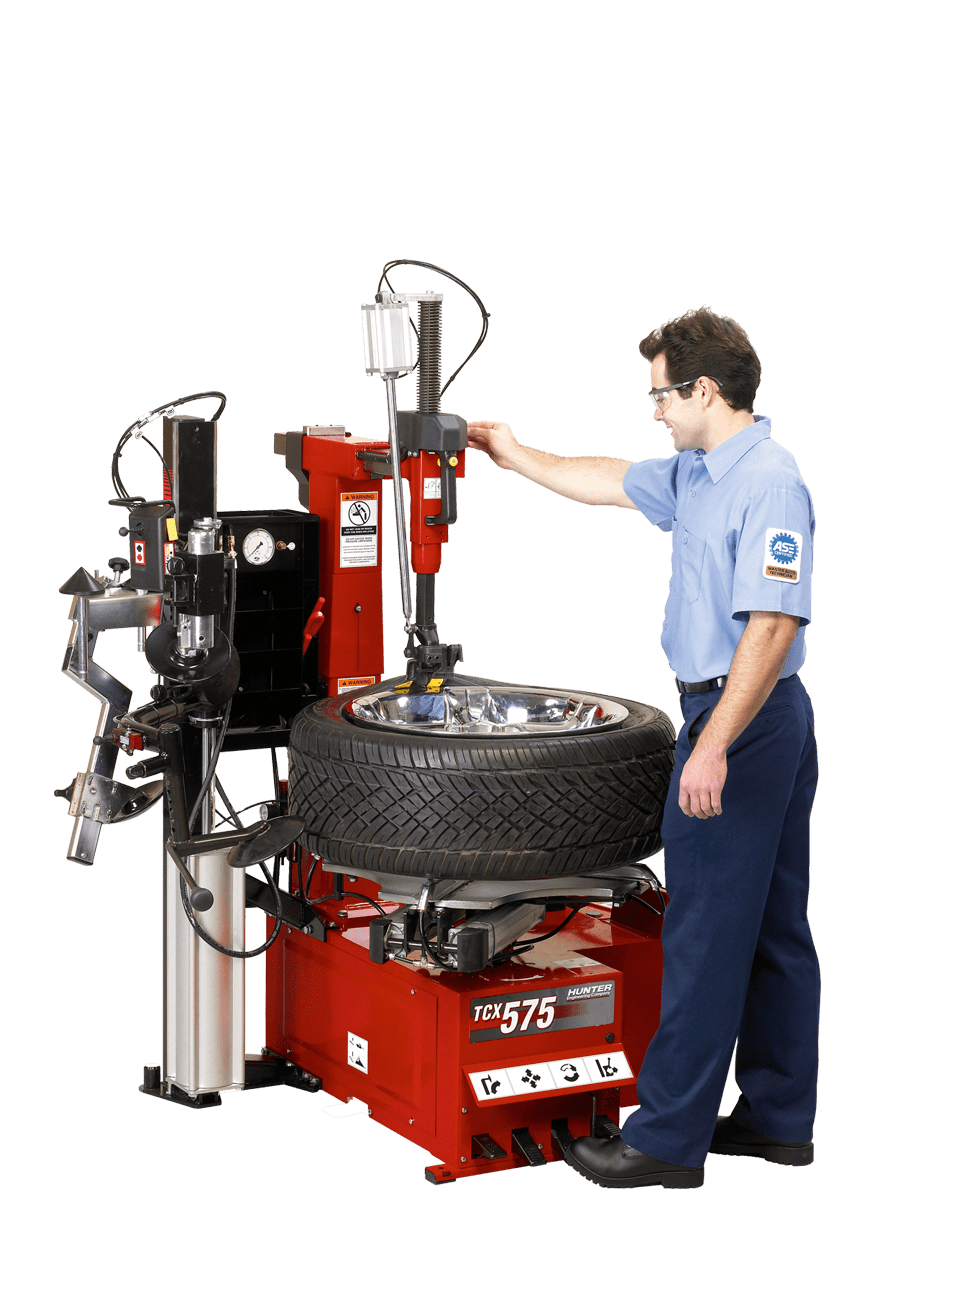 buy a hunter tire changer in new haven CT